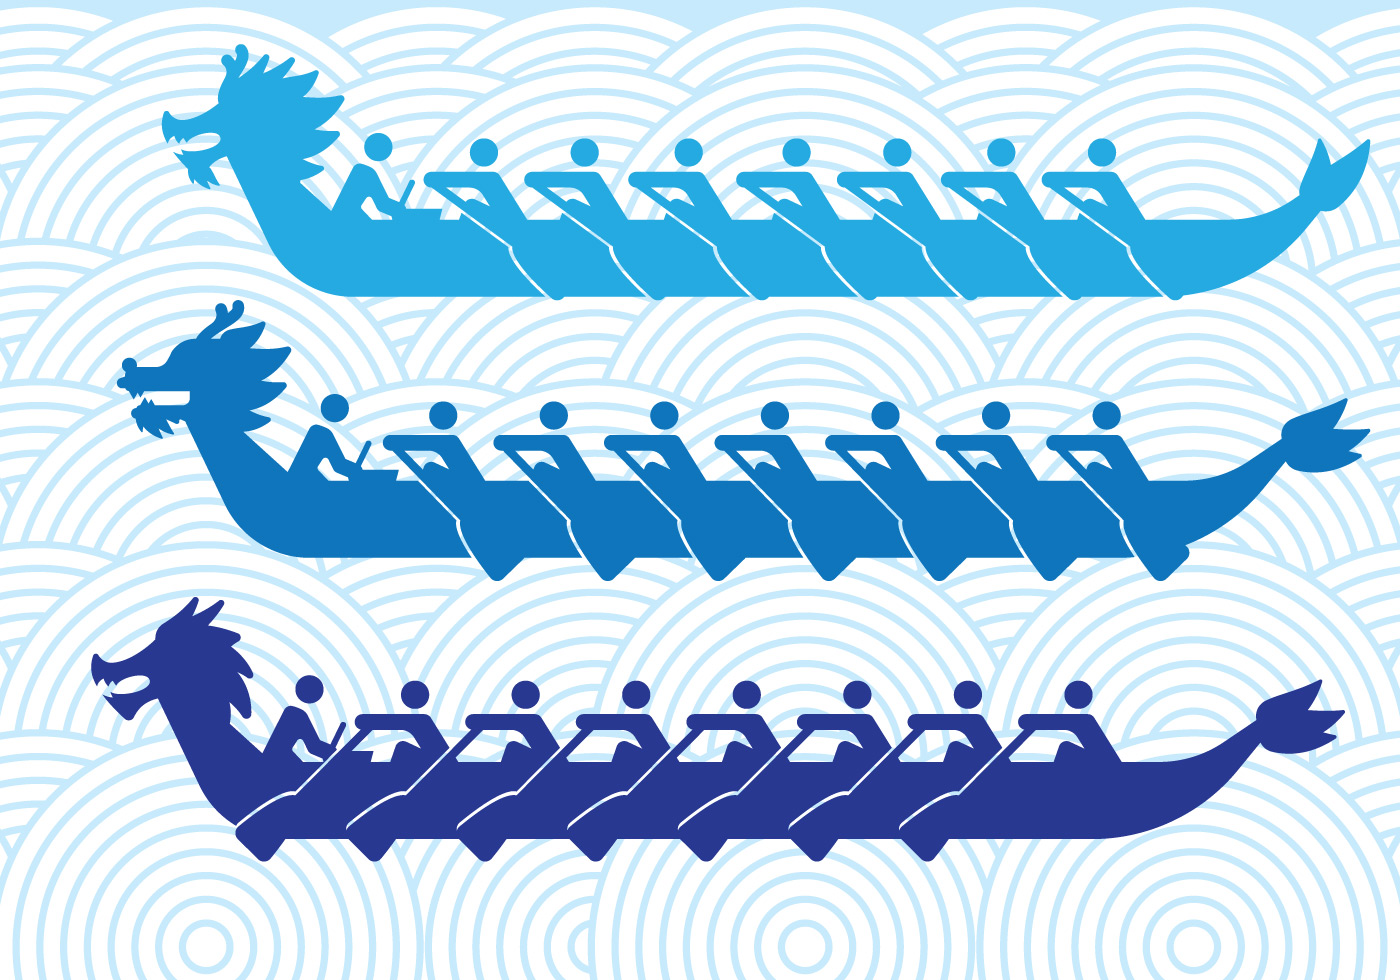 Dragon Boats Silhouettes - Download Free Vectors, Clipart 